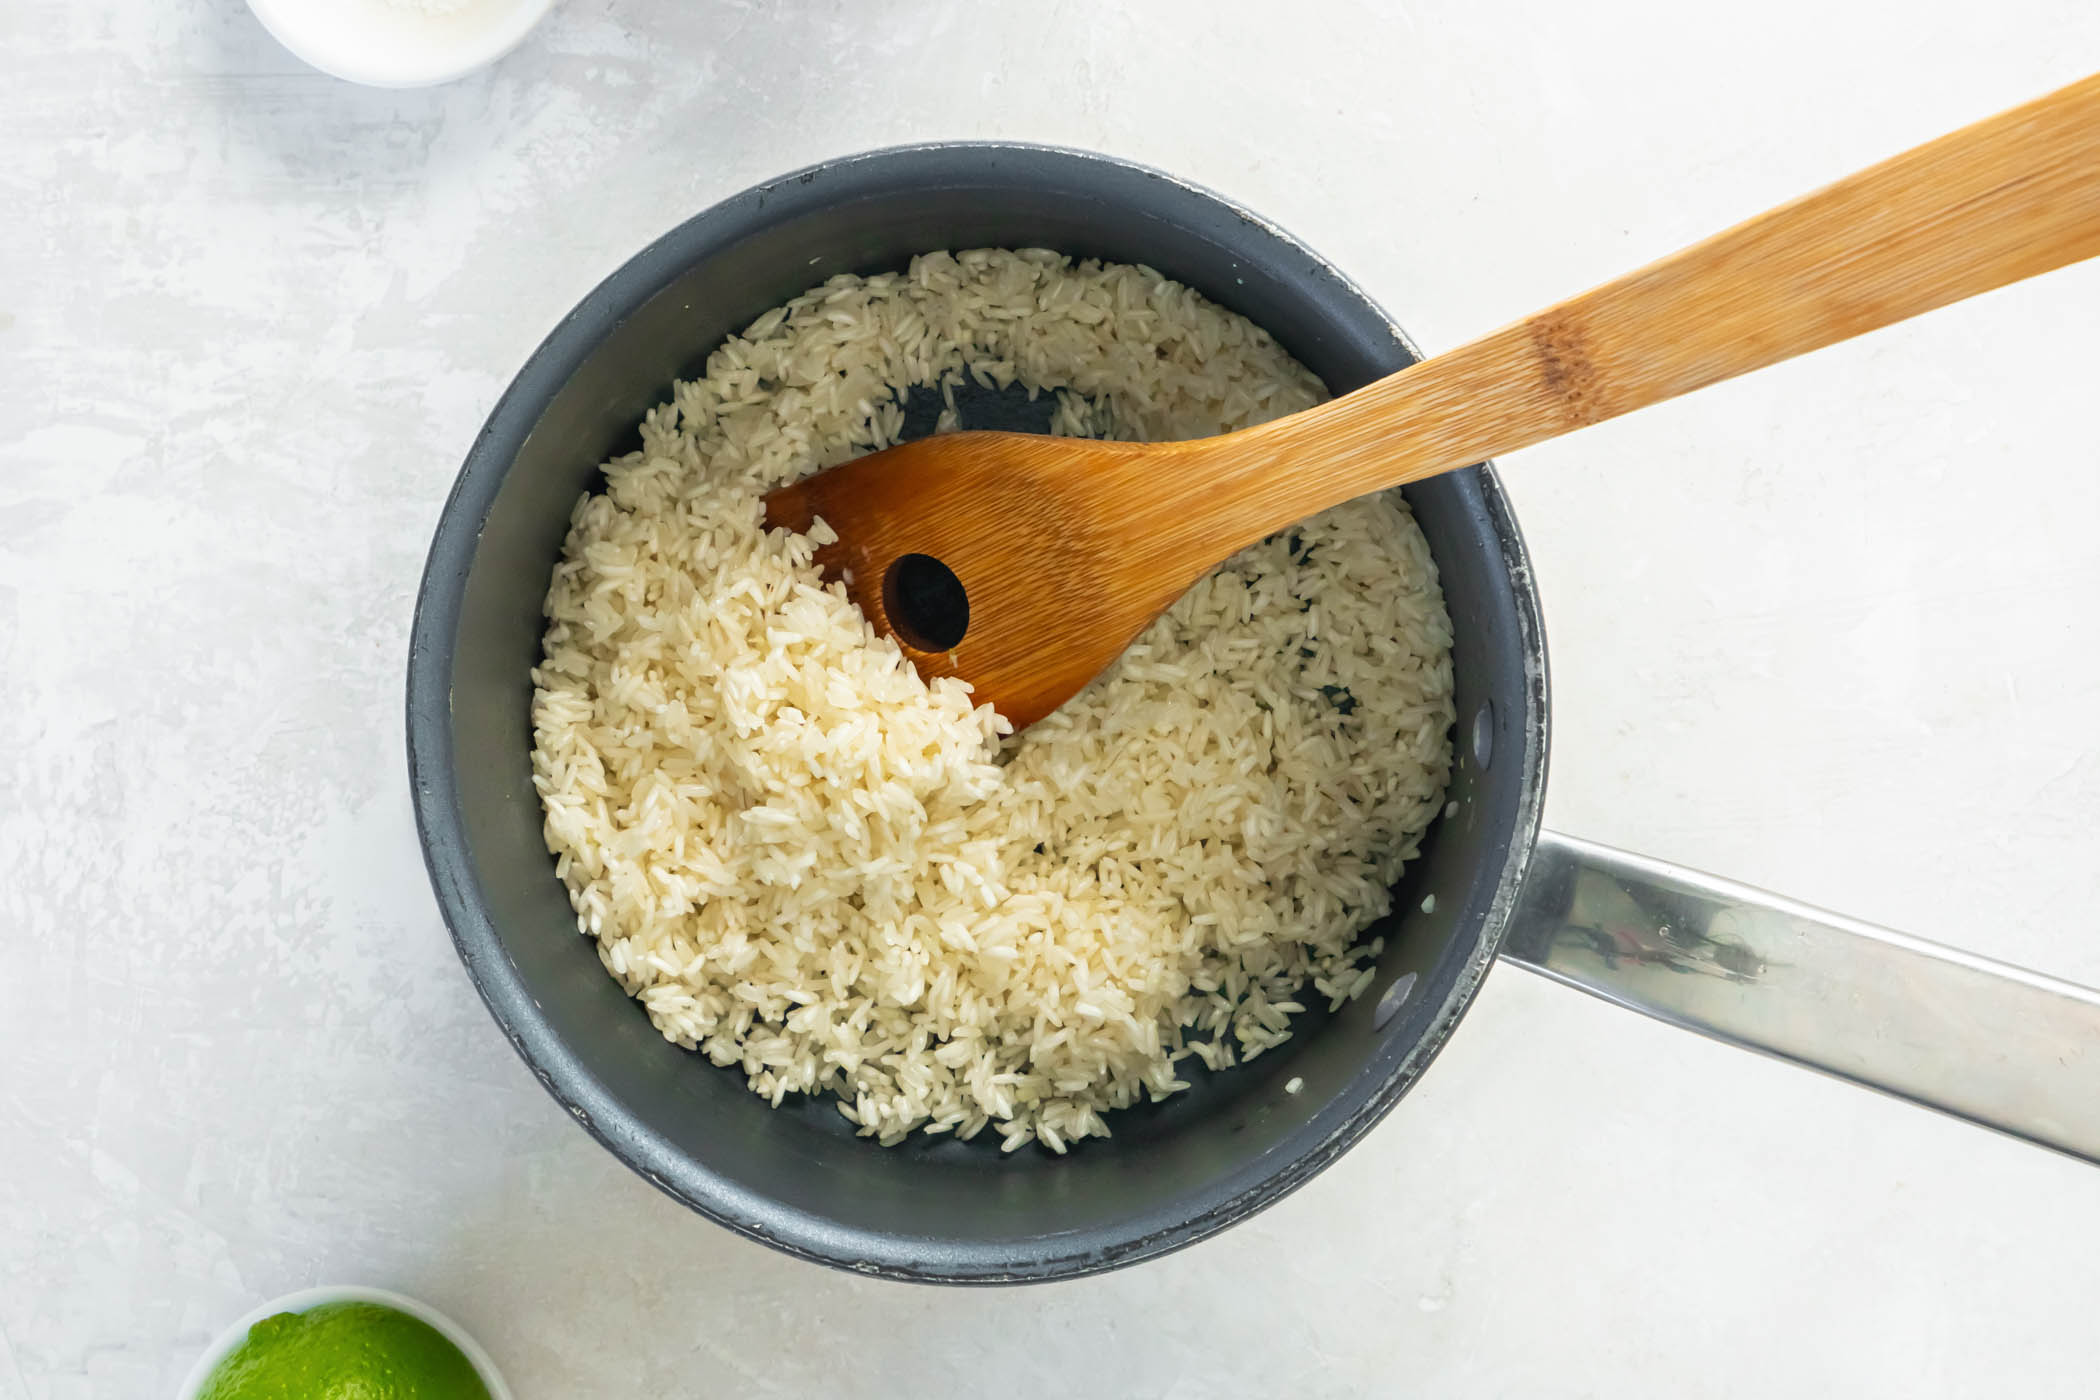 Toasting rice and garlic in a small saucepan with wooden spoon for stirring.